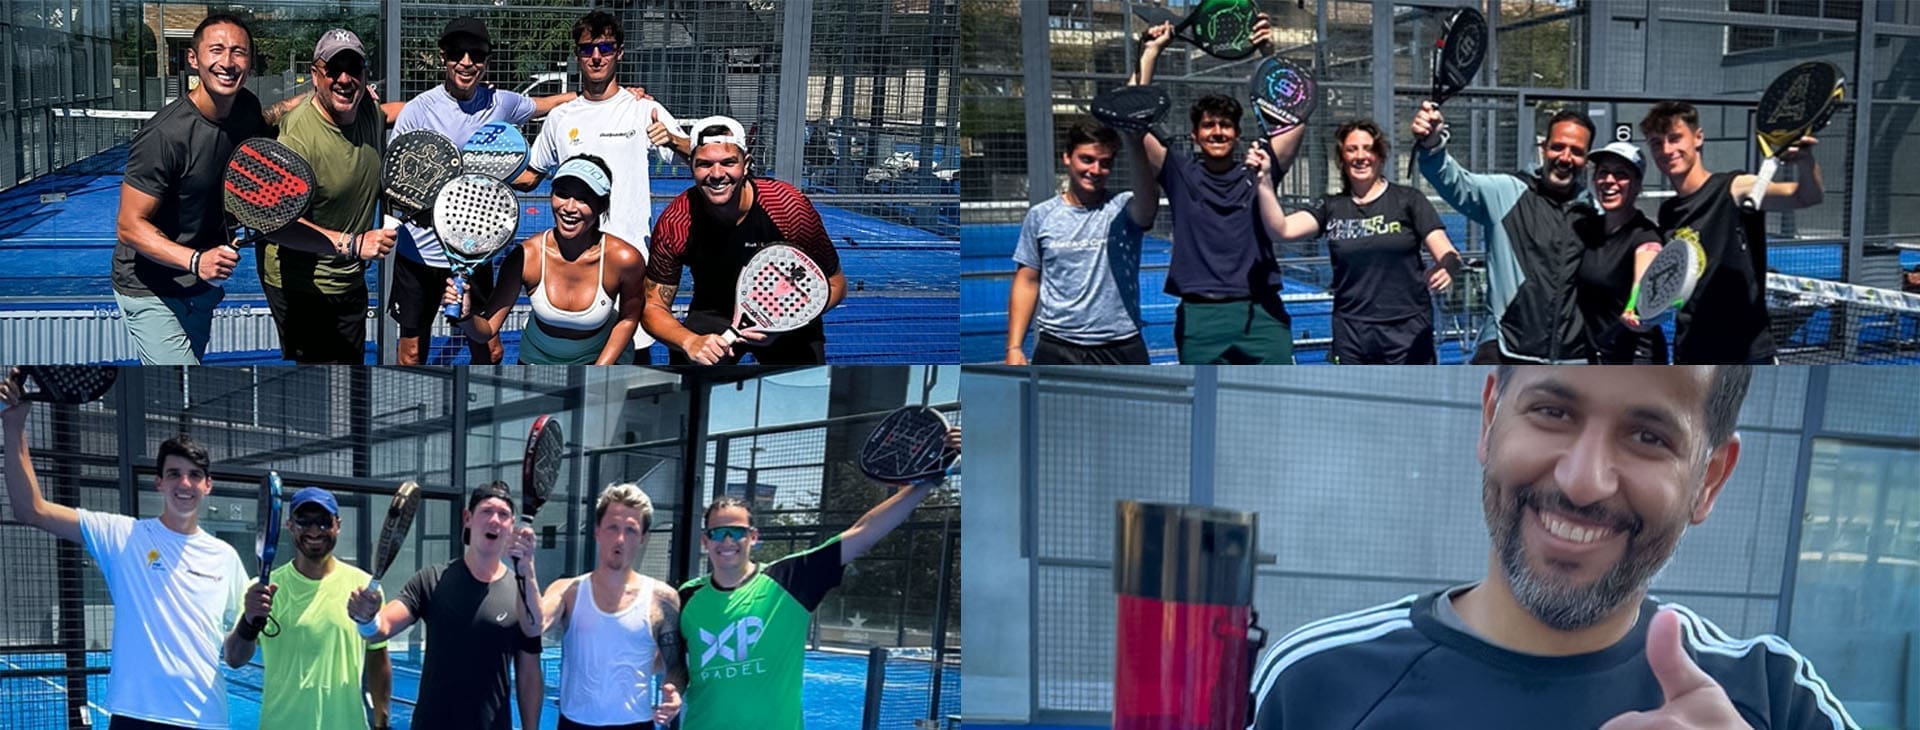 Your Premium Padel Experience: Exceptional Clinics, Camps, and Holiday Packages